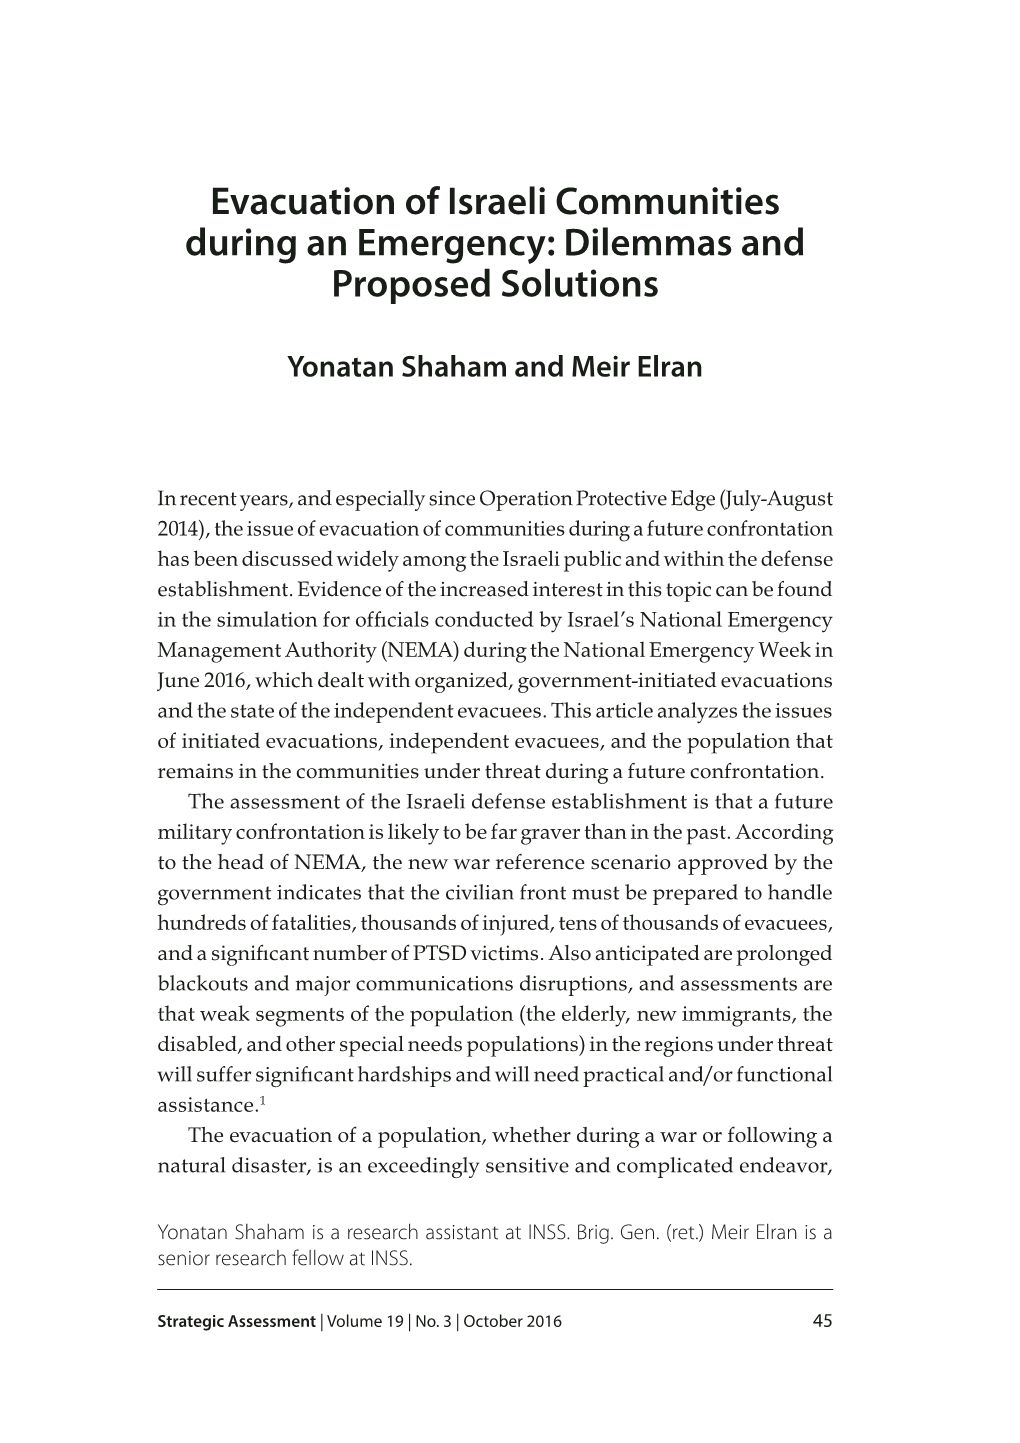 Evacuation of Israeli Communities During an Emergency: Dilemmas and Proposed Solutions